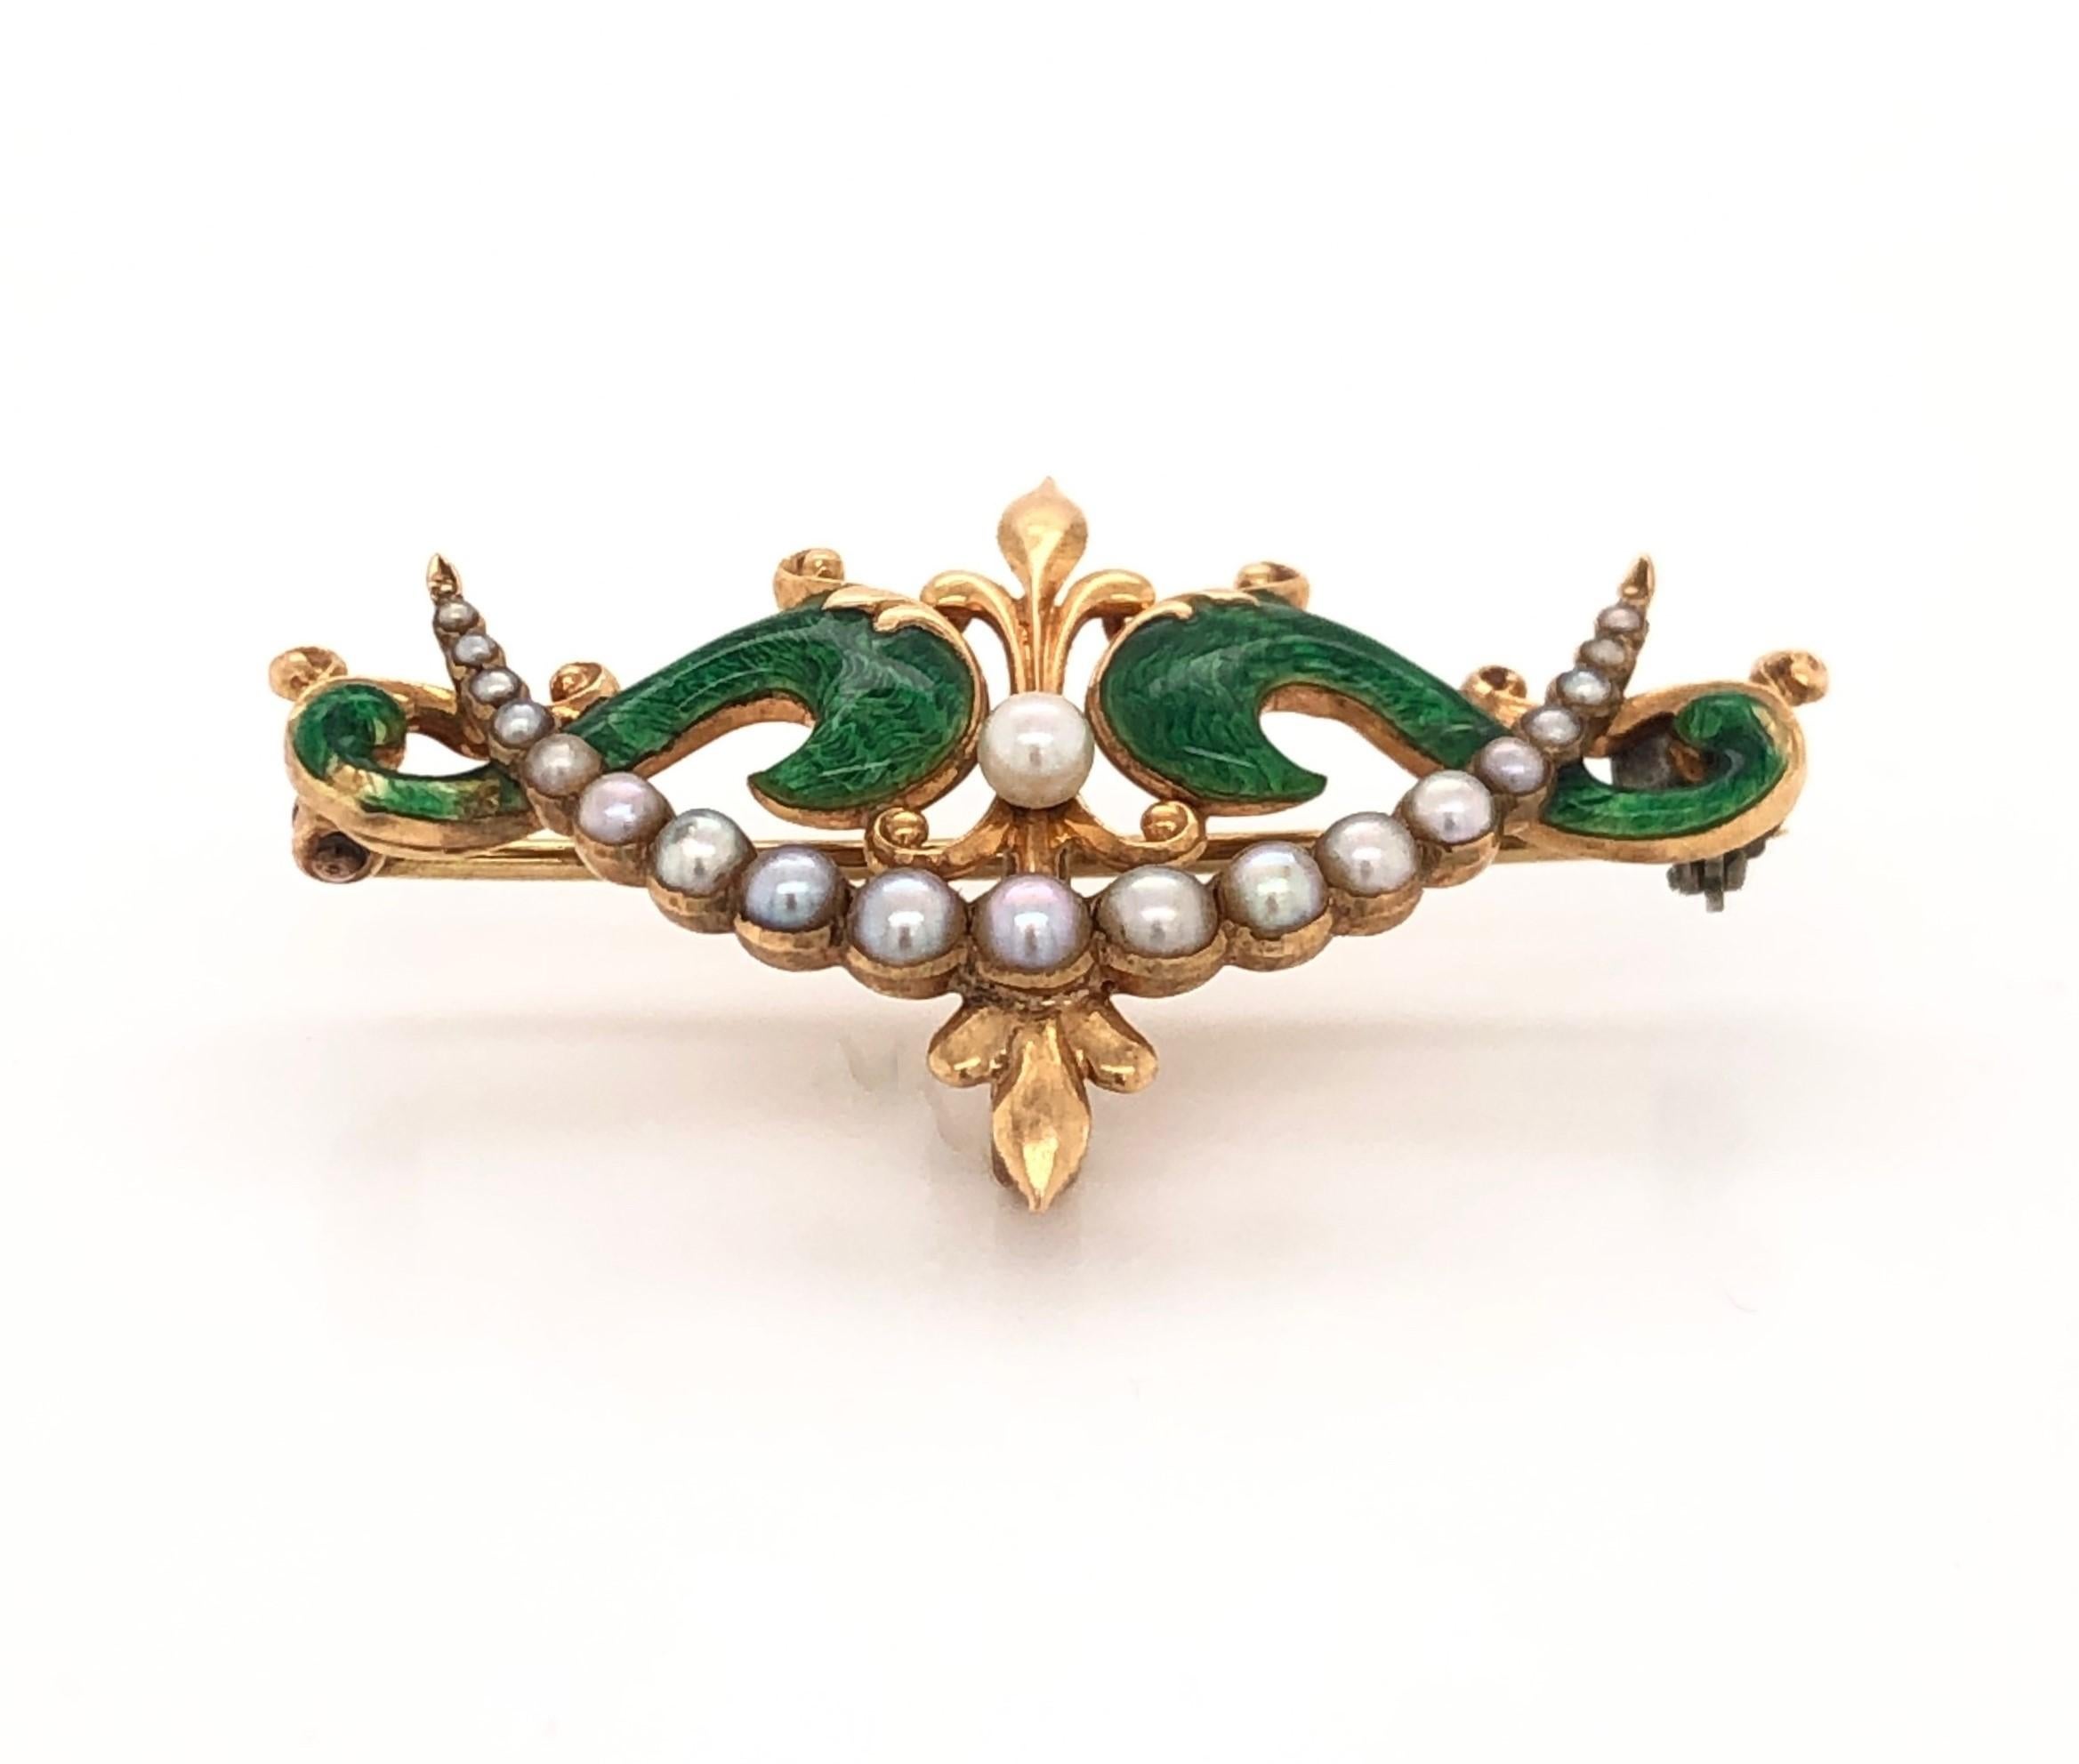 Petite and elegant with a scroll motif, this antique fourteen carat 14K yellow gold pin brooch is hand decorated with a vibrant green enamel and adorned with a crown of pearls. Measuring 1-1/2 inches wide and just under an inch top to bottom, it sit